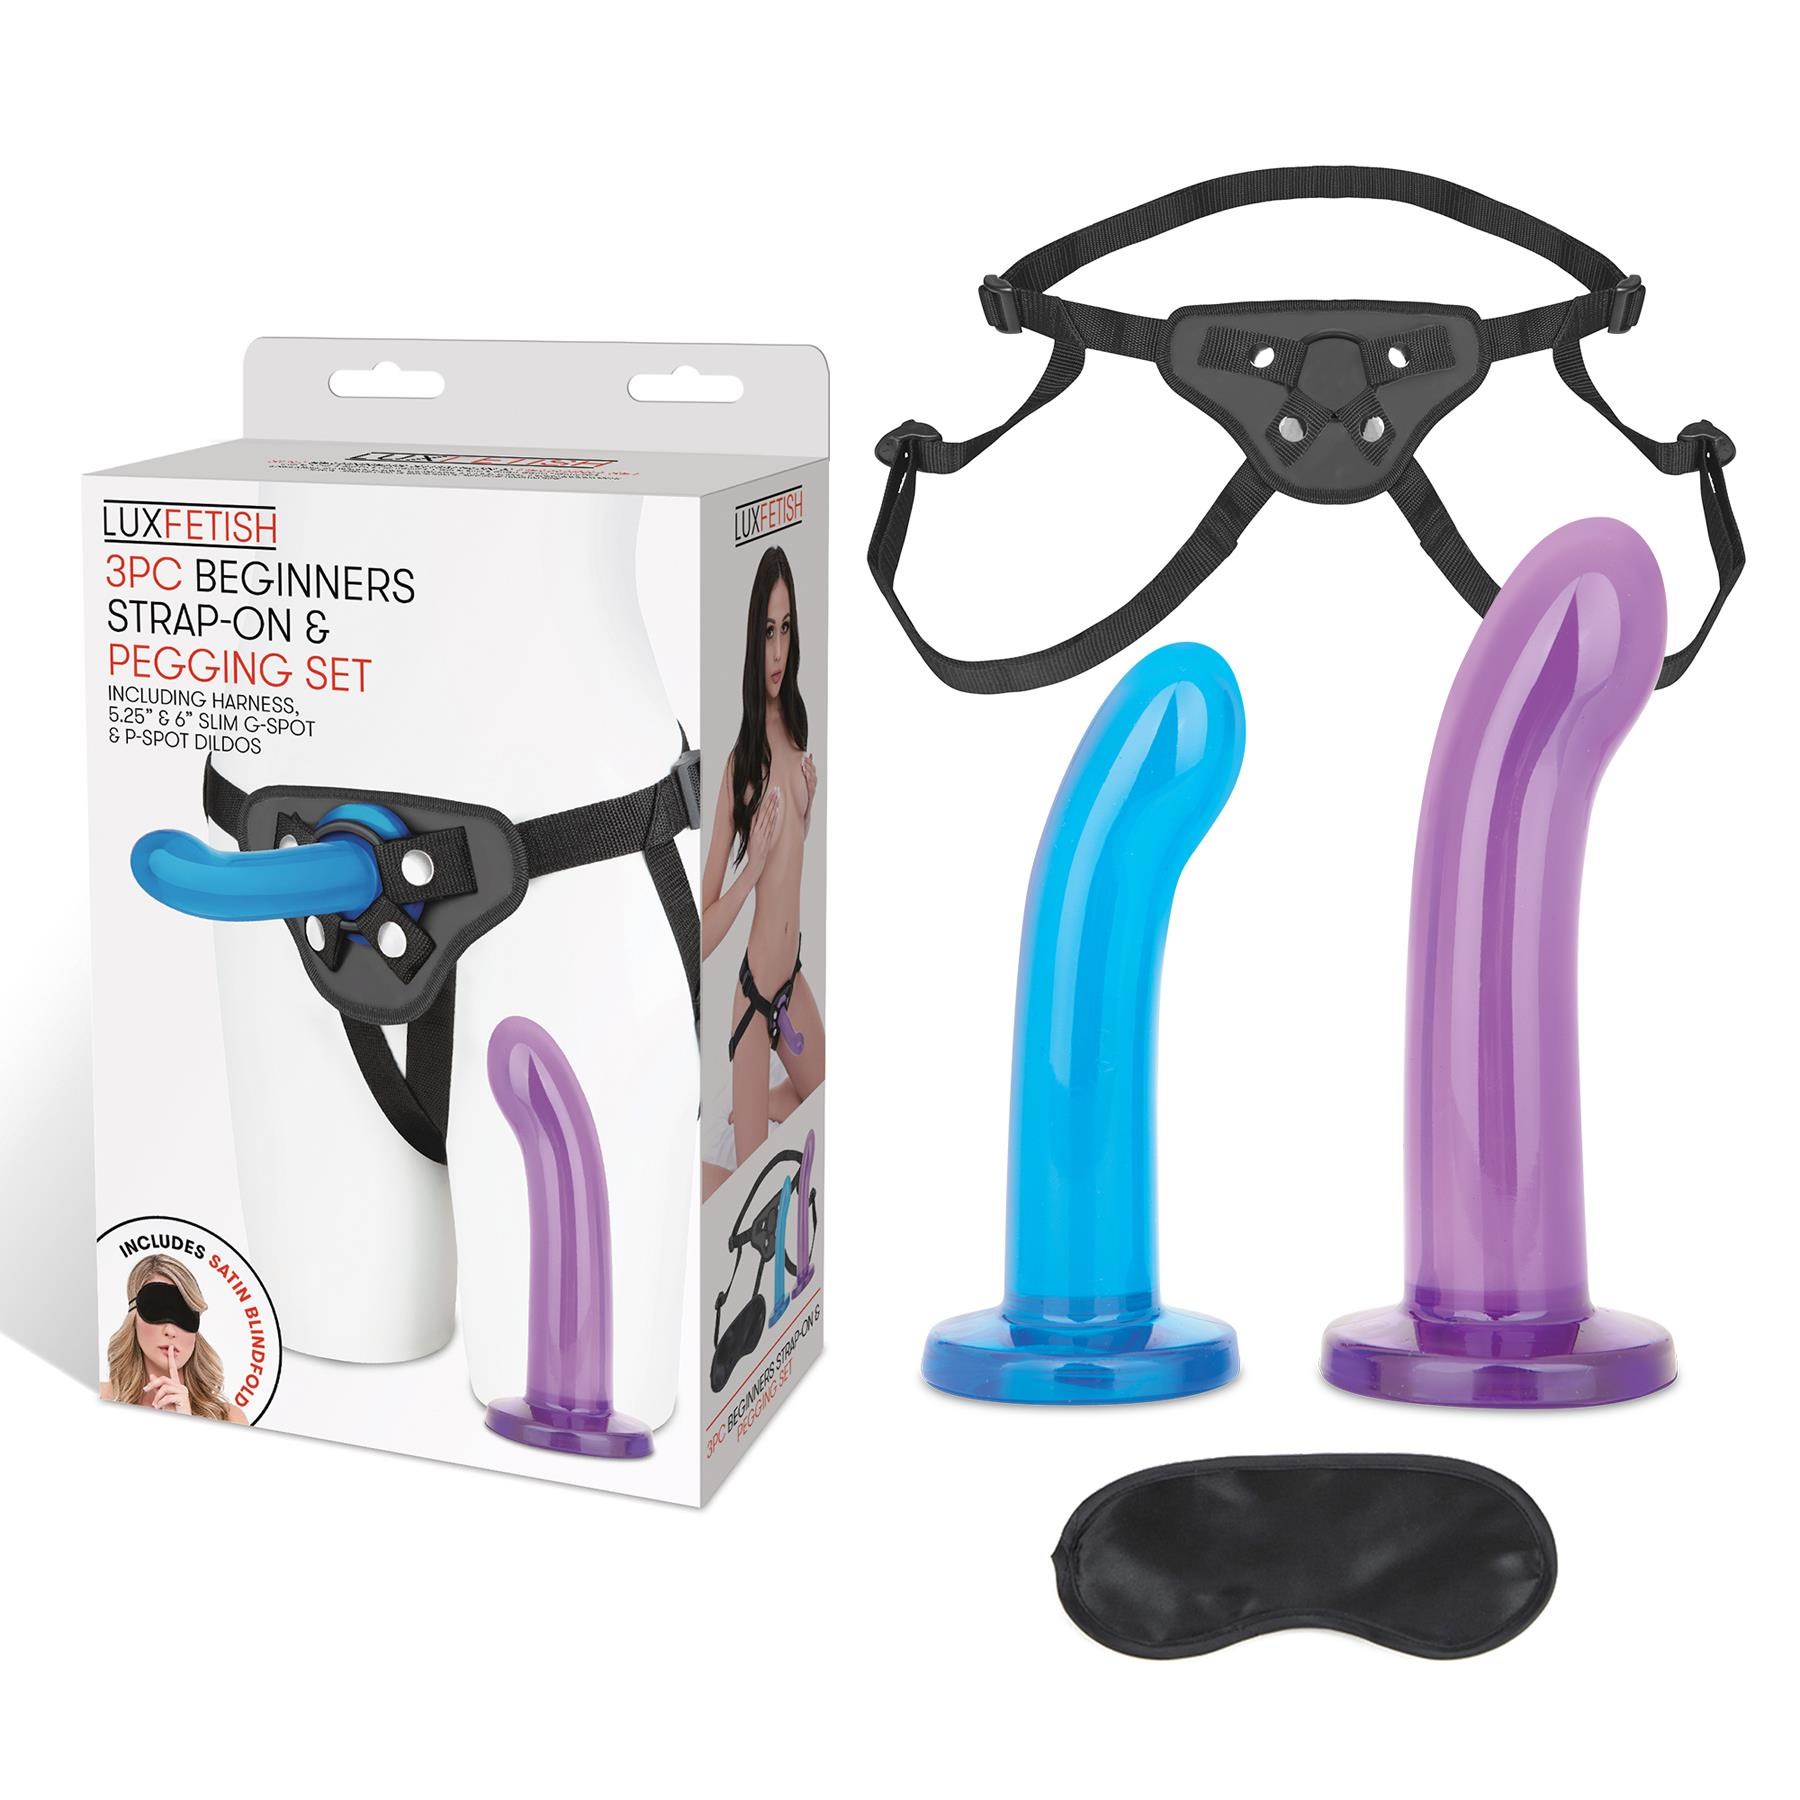 Lux Fetish 3 Piece Beginners Strap-On and Pegging Set - - Product and Packaging